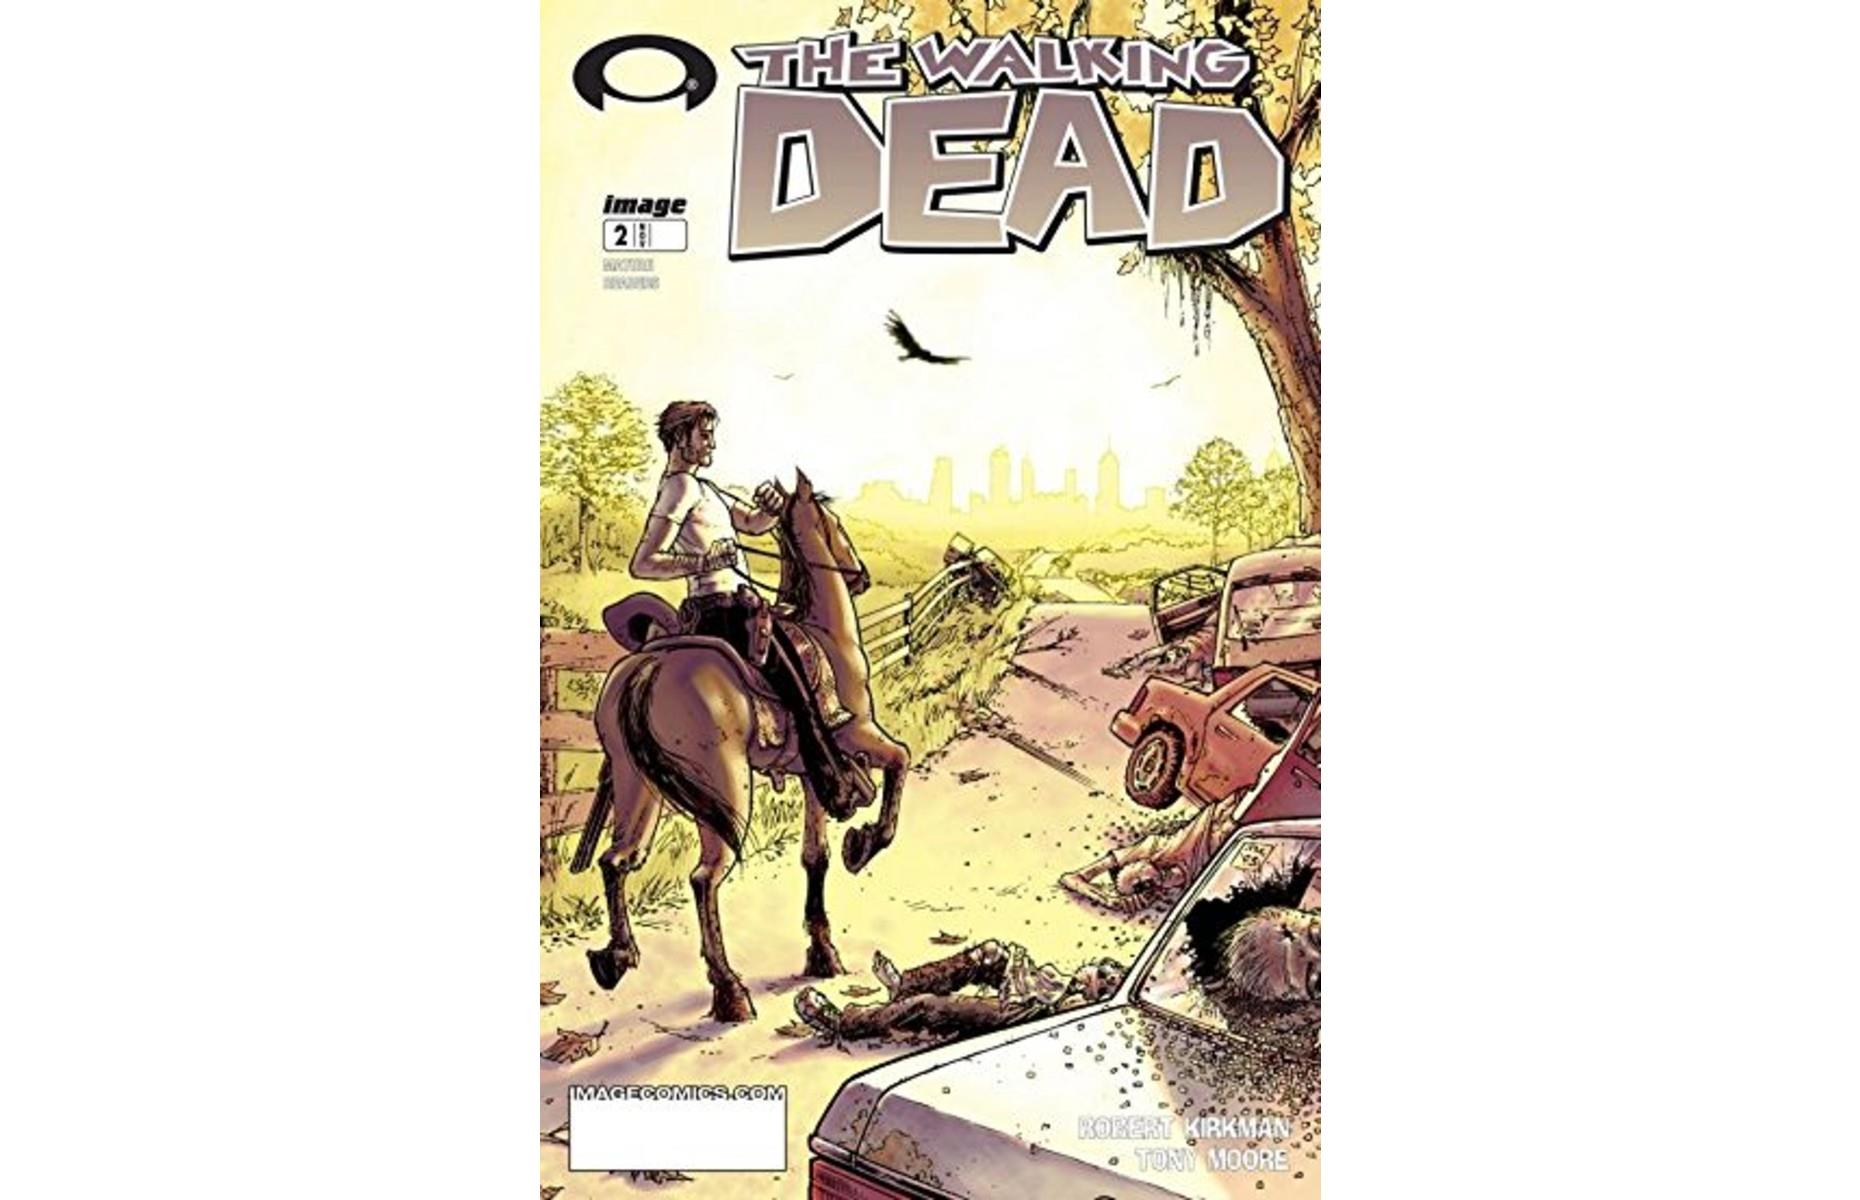 Walking Dead #2: up to £875 ($1,150)